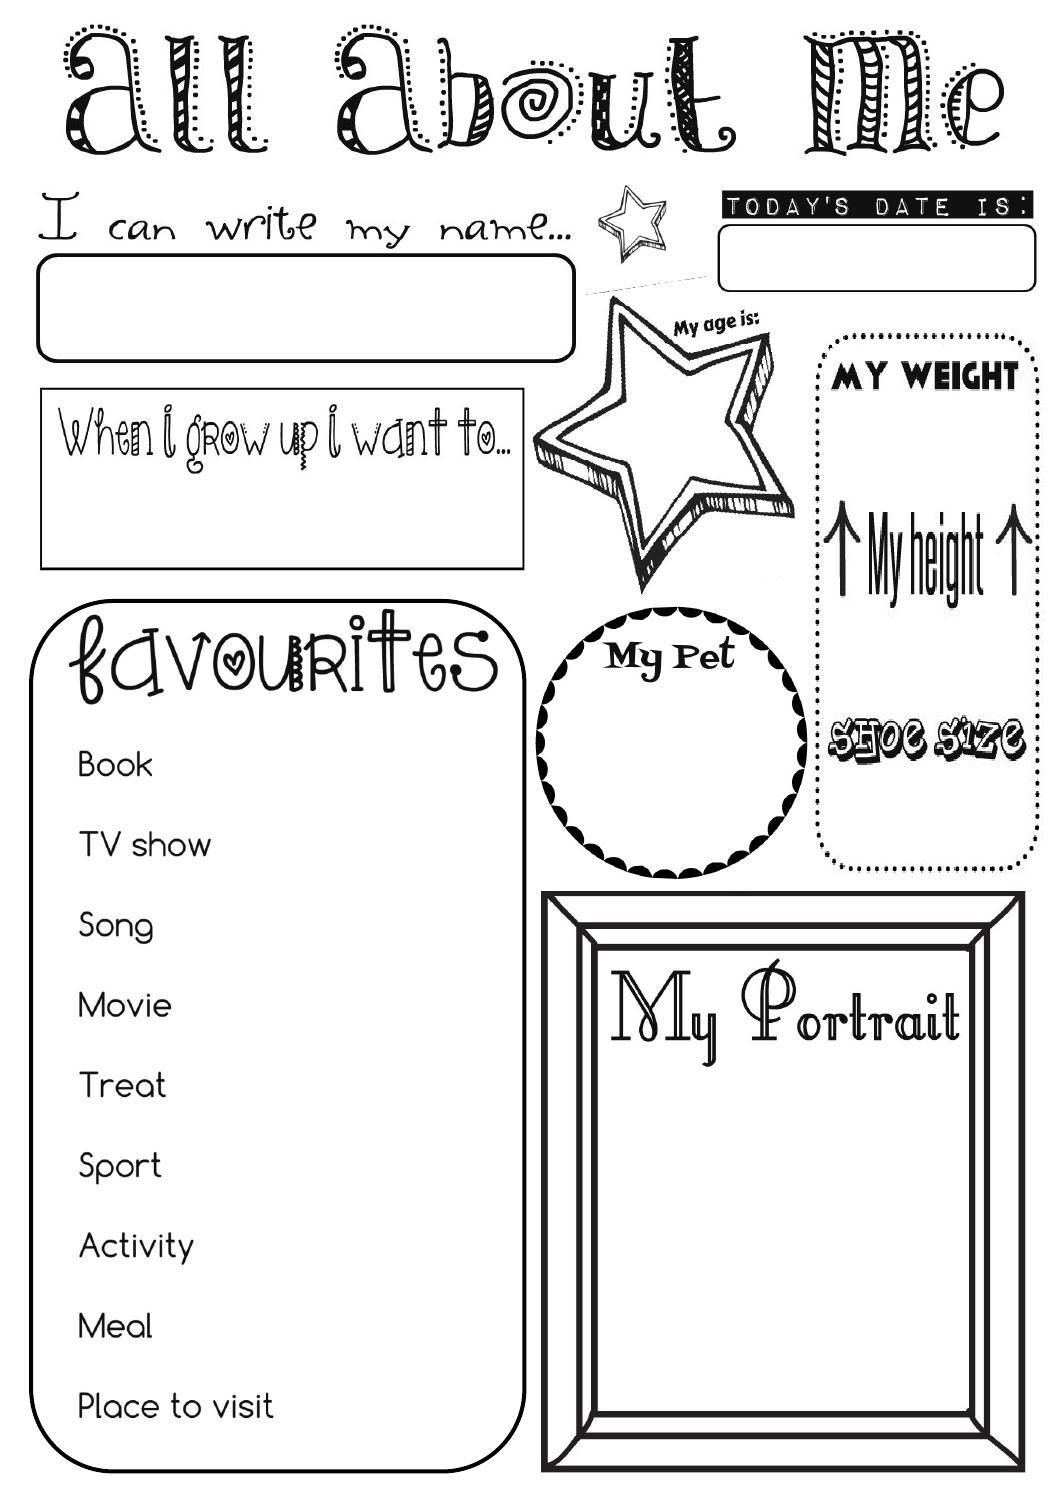 All About Me Activity Sheet By Ernie And Bird All About Me Activities 